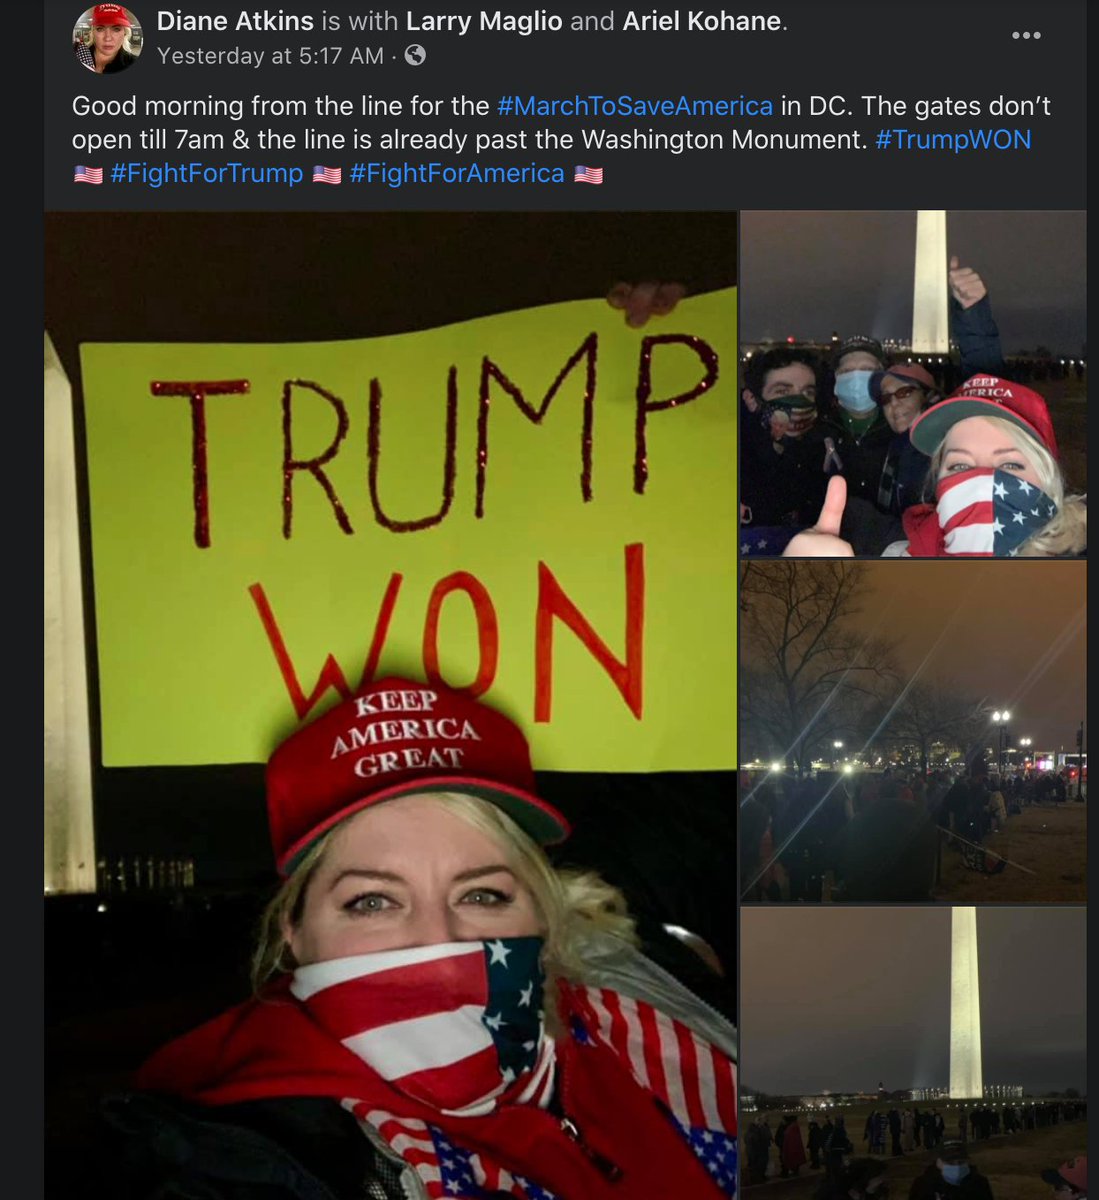 5:00AM: Trump supporters start to gather outside The Ellipse, a park south of the White House fence, for a rally that has been planned for weeks.  https://www.facebook.com/datkins2/posts/10223092996970549 Gates only open at 7am.